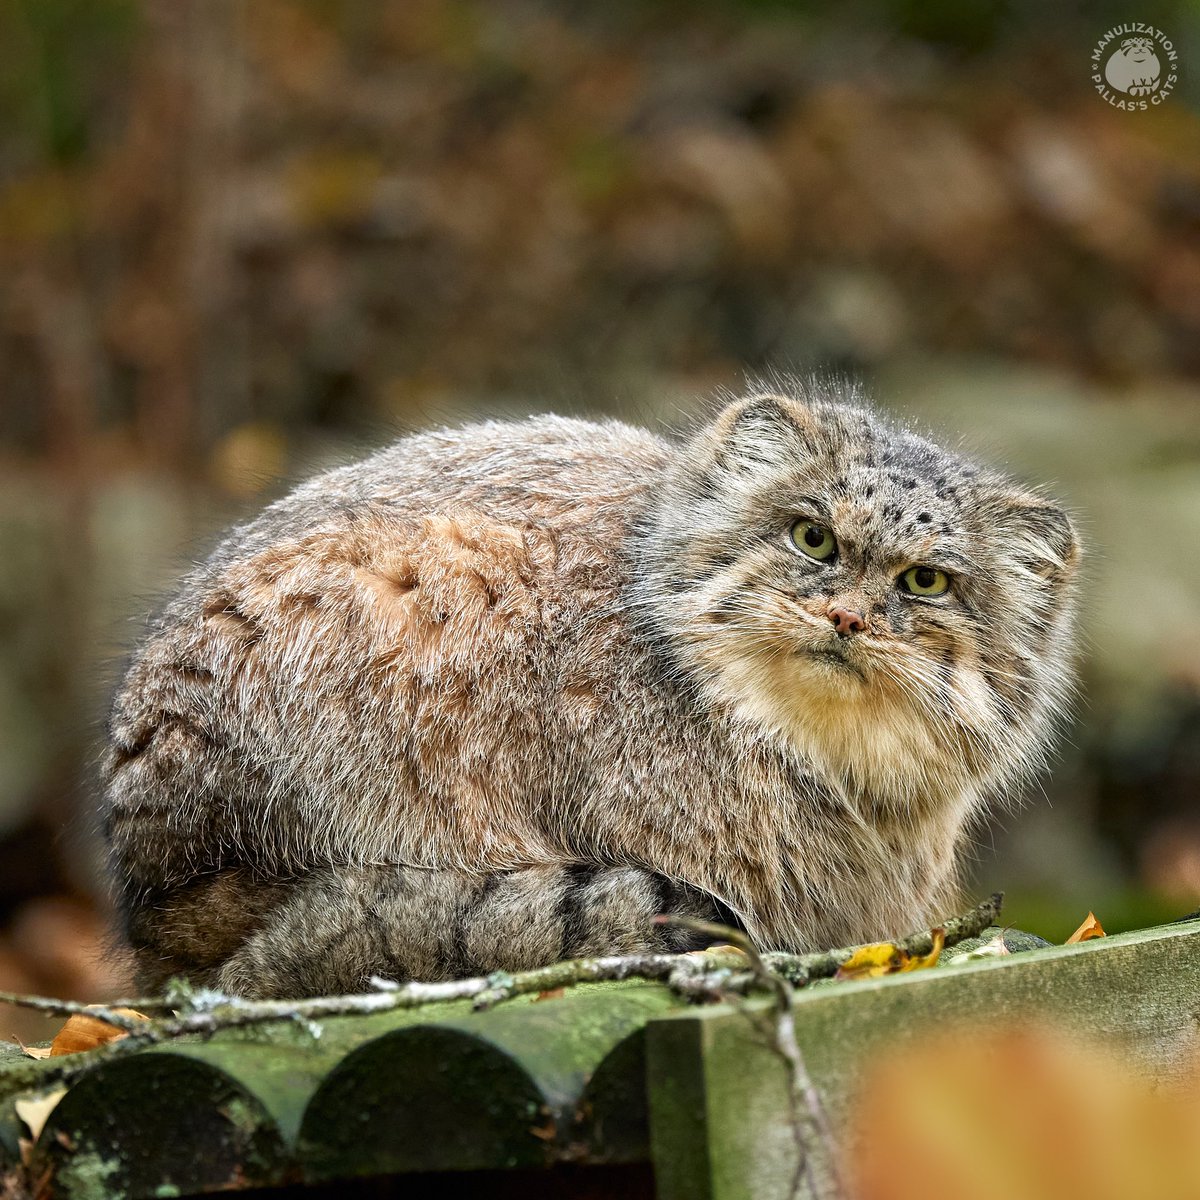 ⚡️ Manul-news: Pazzo has moved! 

In April our fluffy philosopher Pazzo moved from Nordens Ark, Sweden to Łódź zoo, Poland.
His young bride was waiting for him there: Manuela, from Berlin zoo, Germany. She's one year old.

#manul #manuls #pallascat #pallasscat #マヌルネコ  #манул